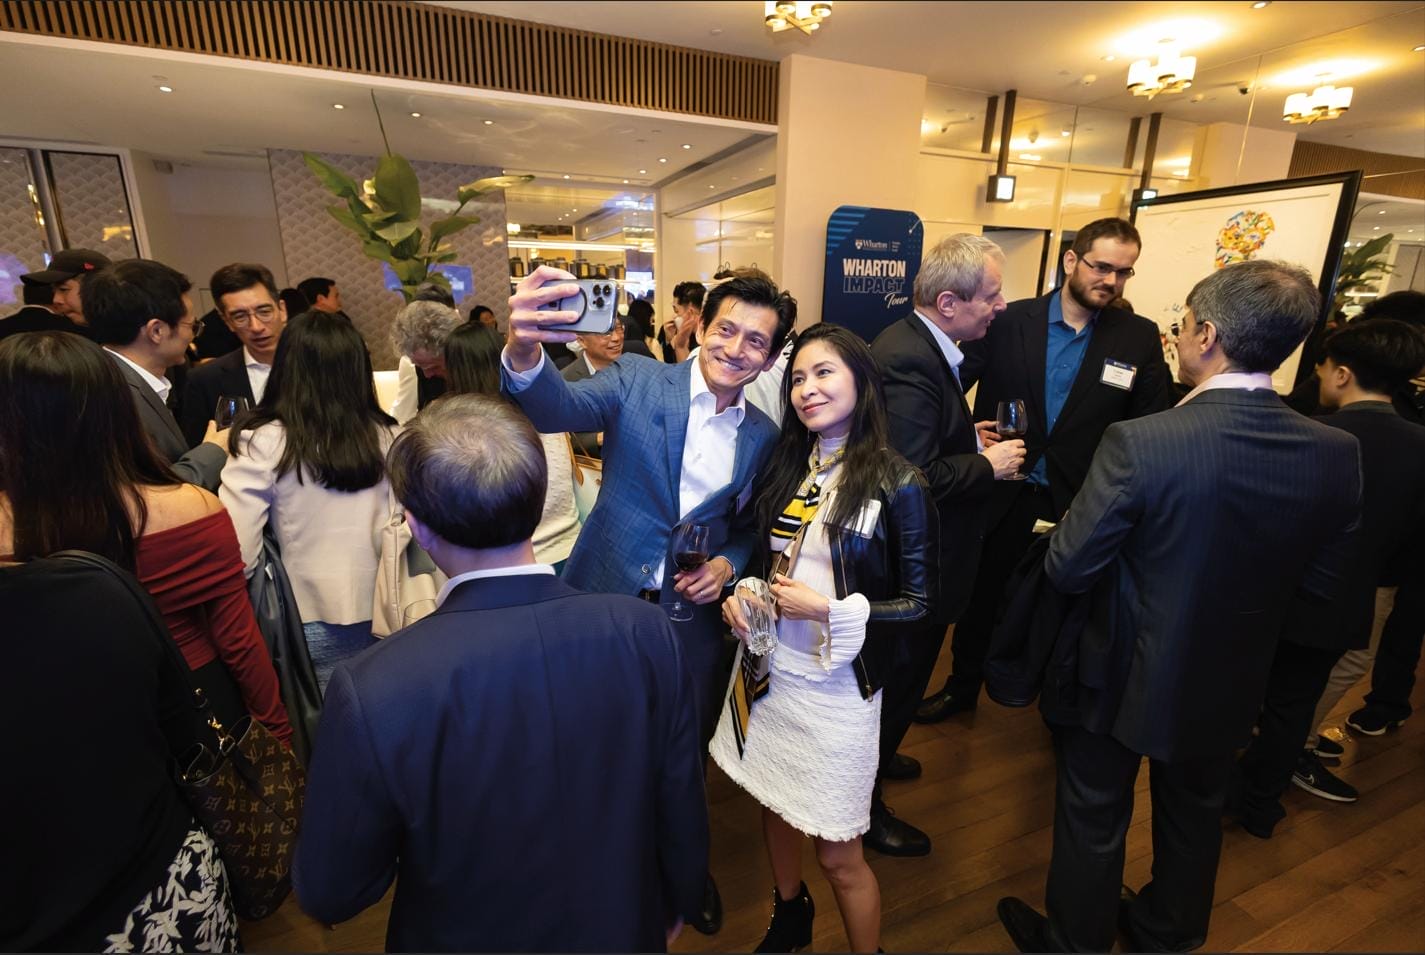 Two people in business attire take a selfie in a room filled with mingling people.